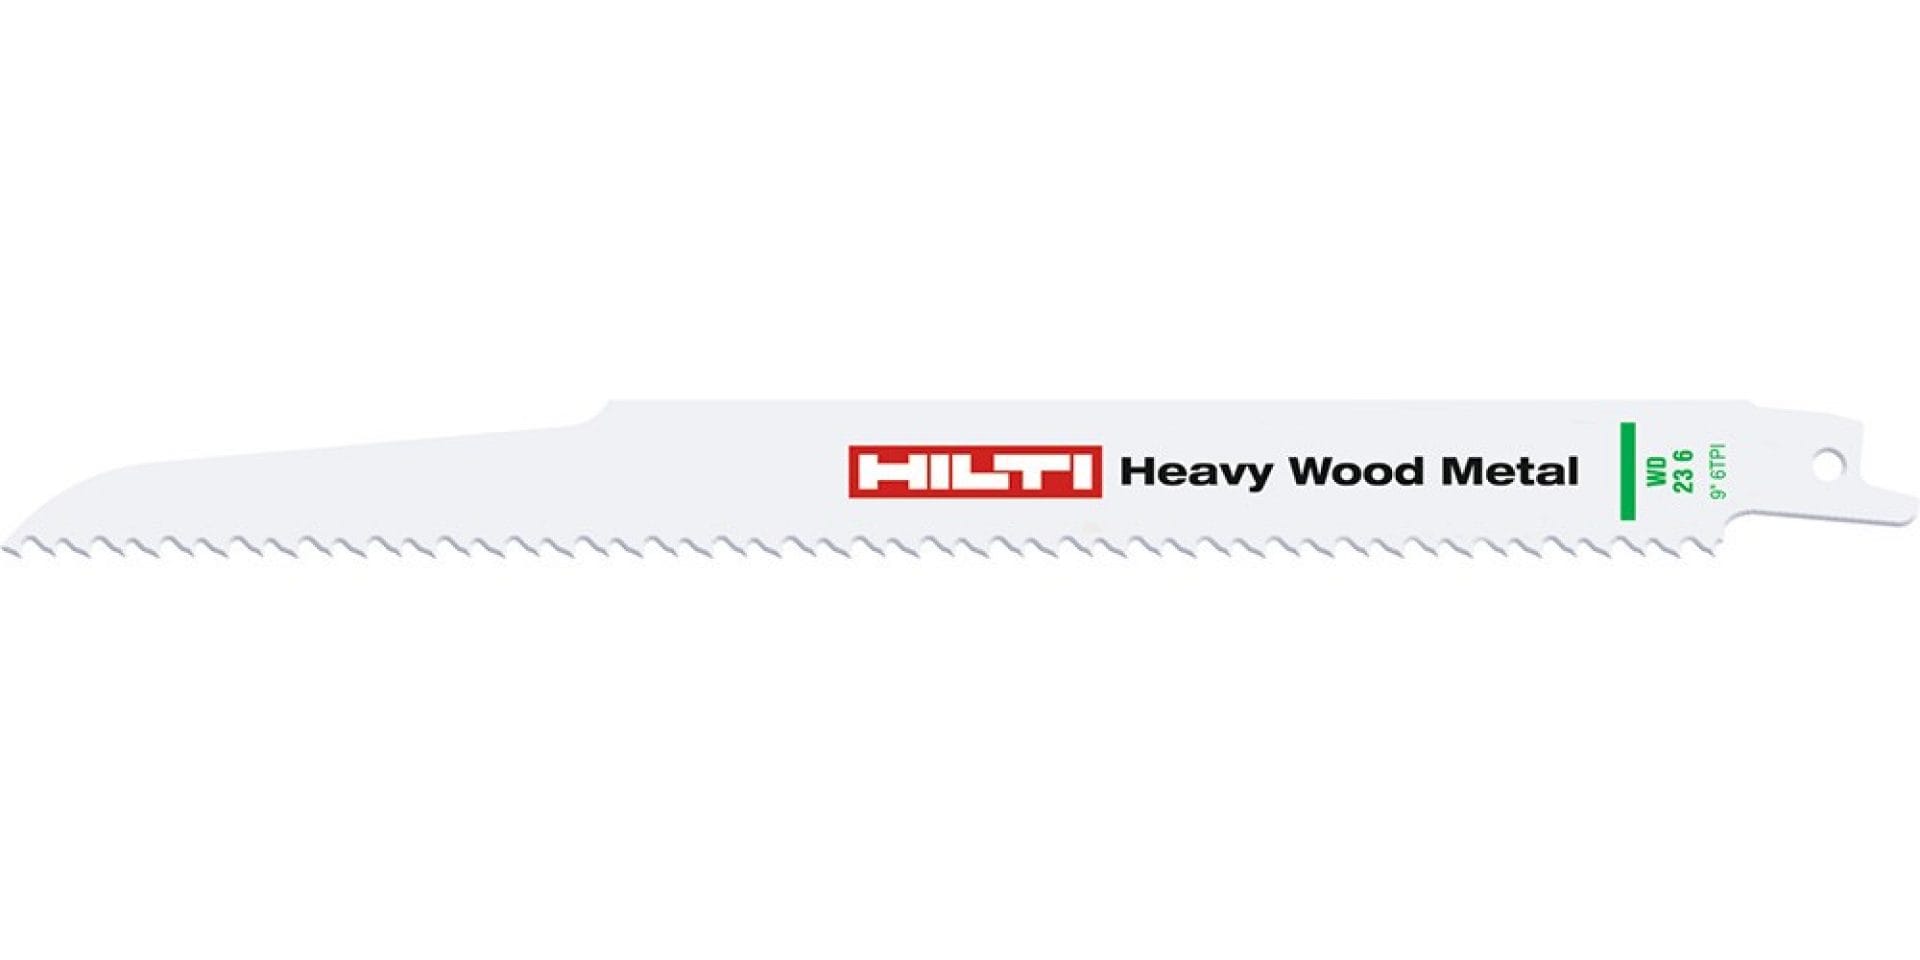 Heavy wood and metal reciprocating saw blade